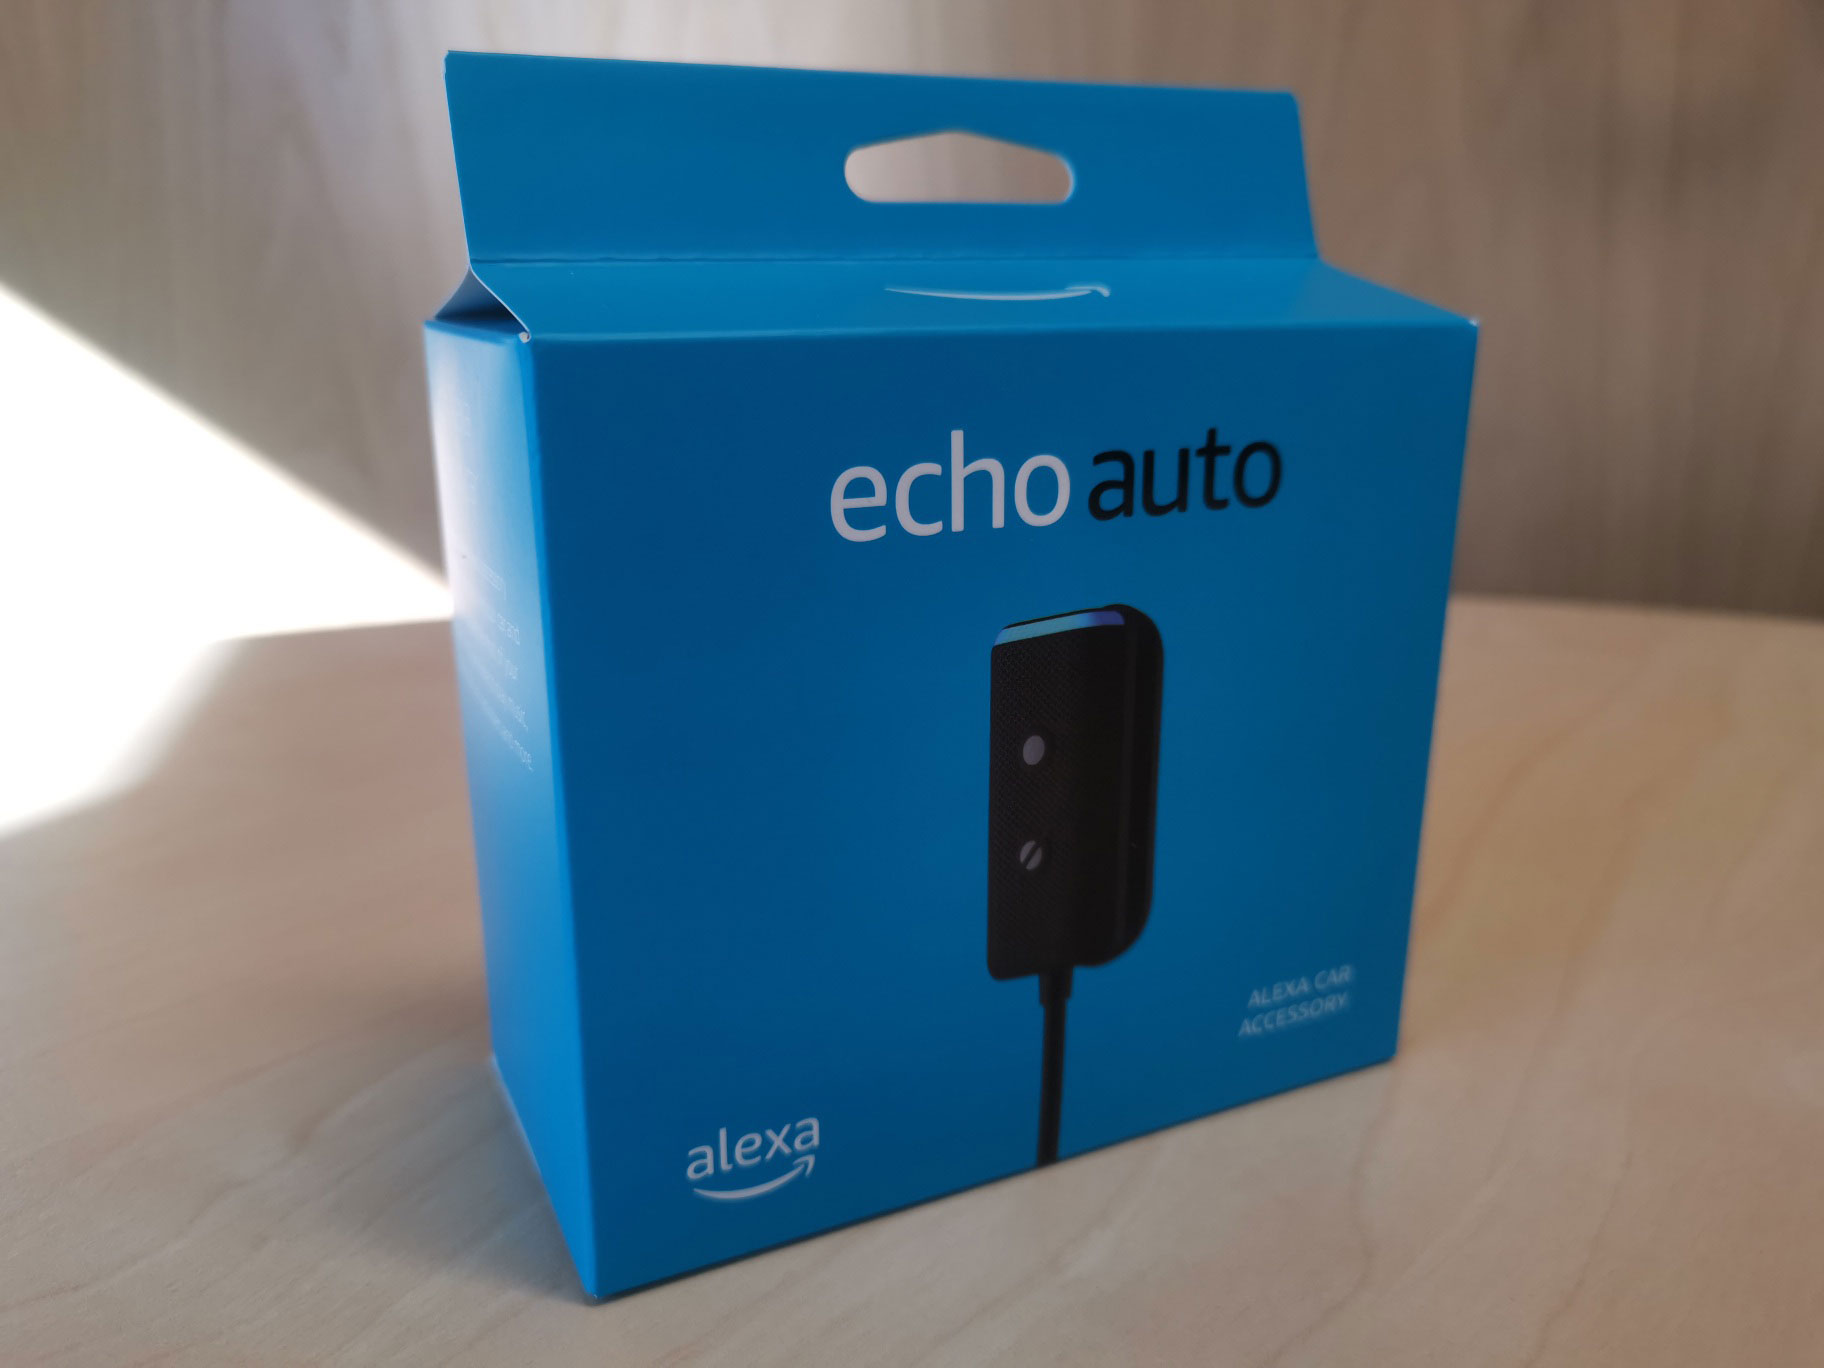 Echo Auto (2nd Gen) review: Alexa for your car just got a big